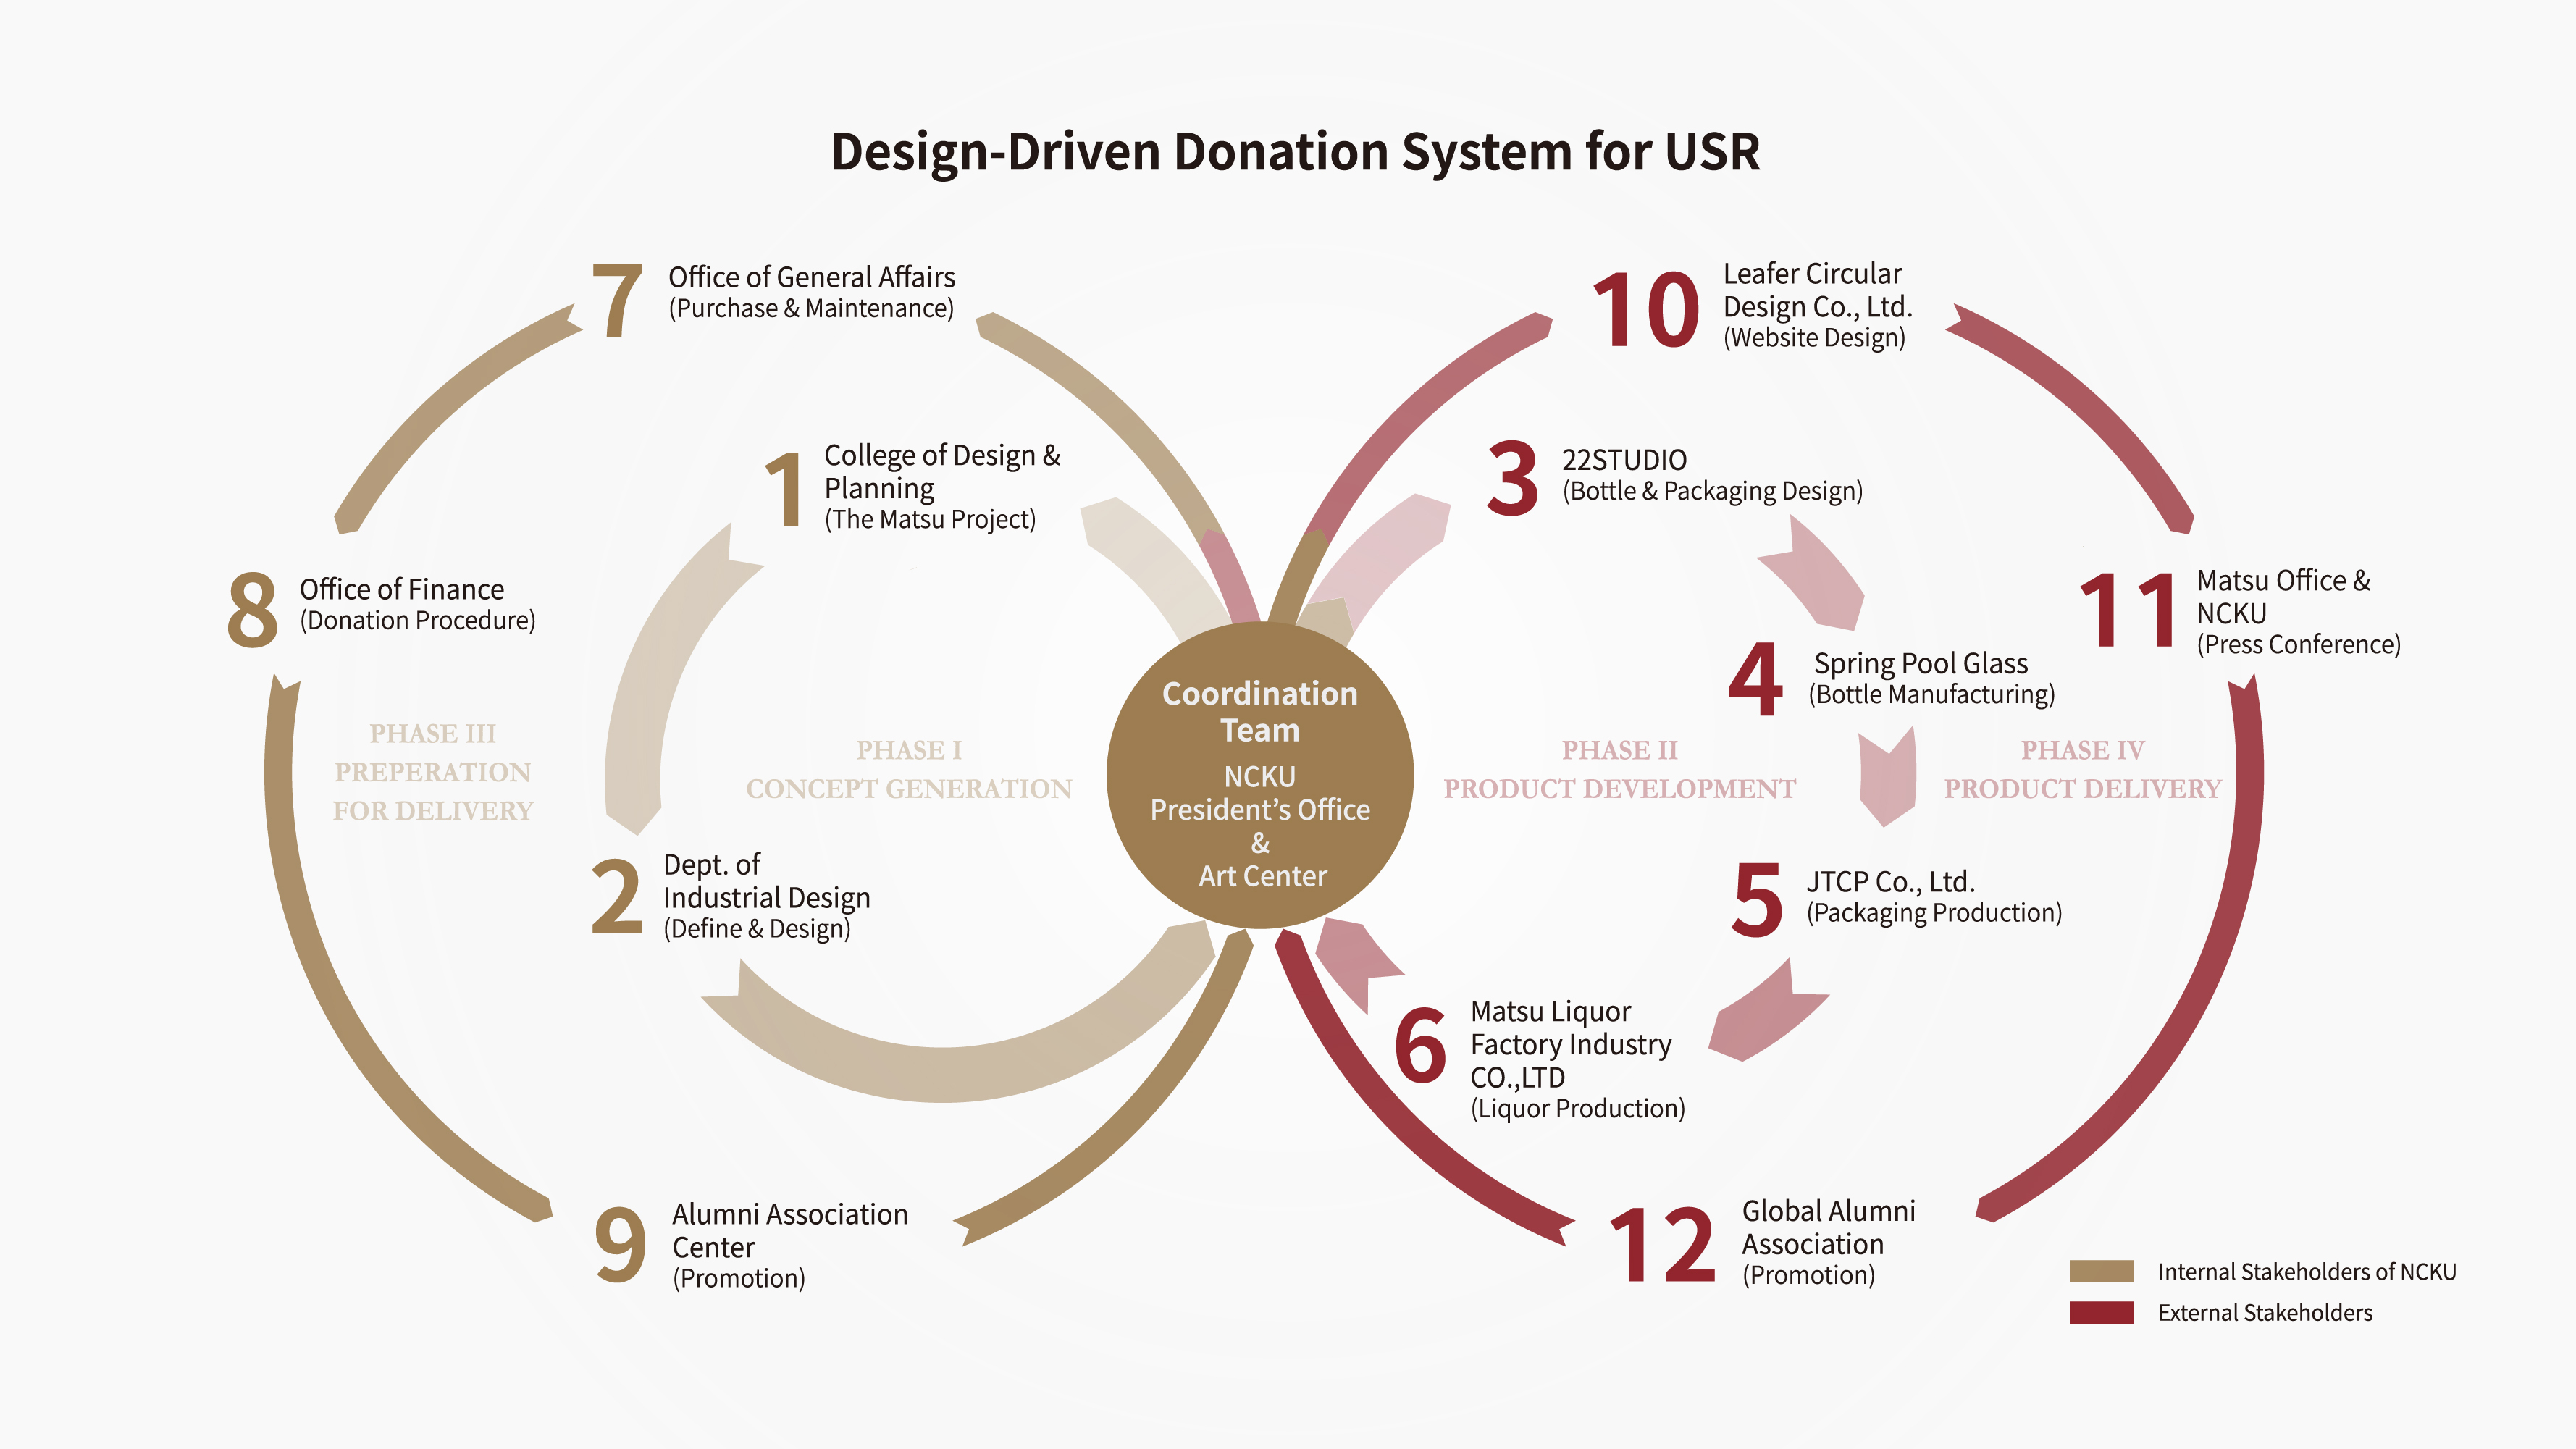 NCKU 90th anniversary commemorative liquor is an integration of design-driven co-creation, forming a new framework to promote the university's social responsibility small donation mechanism, which can be deemed “Design-Driven Donation System for USR”